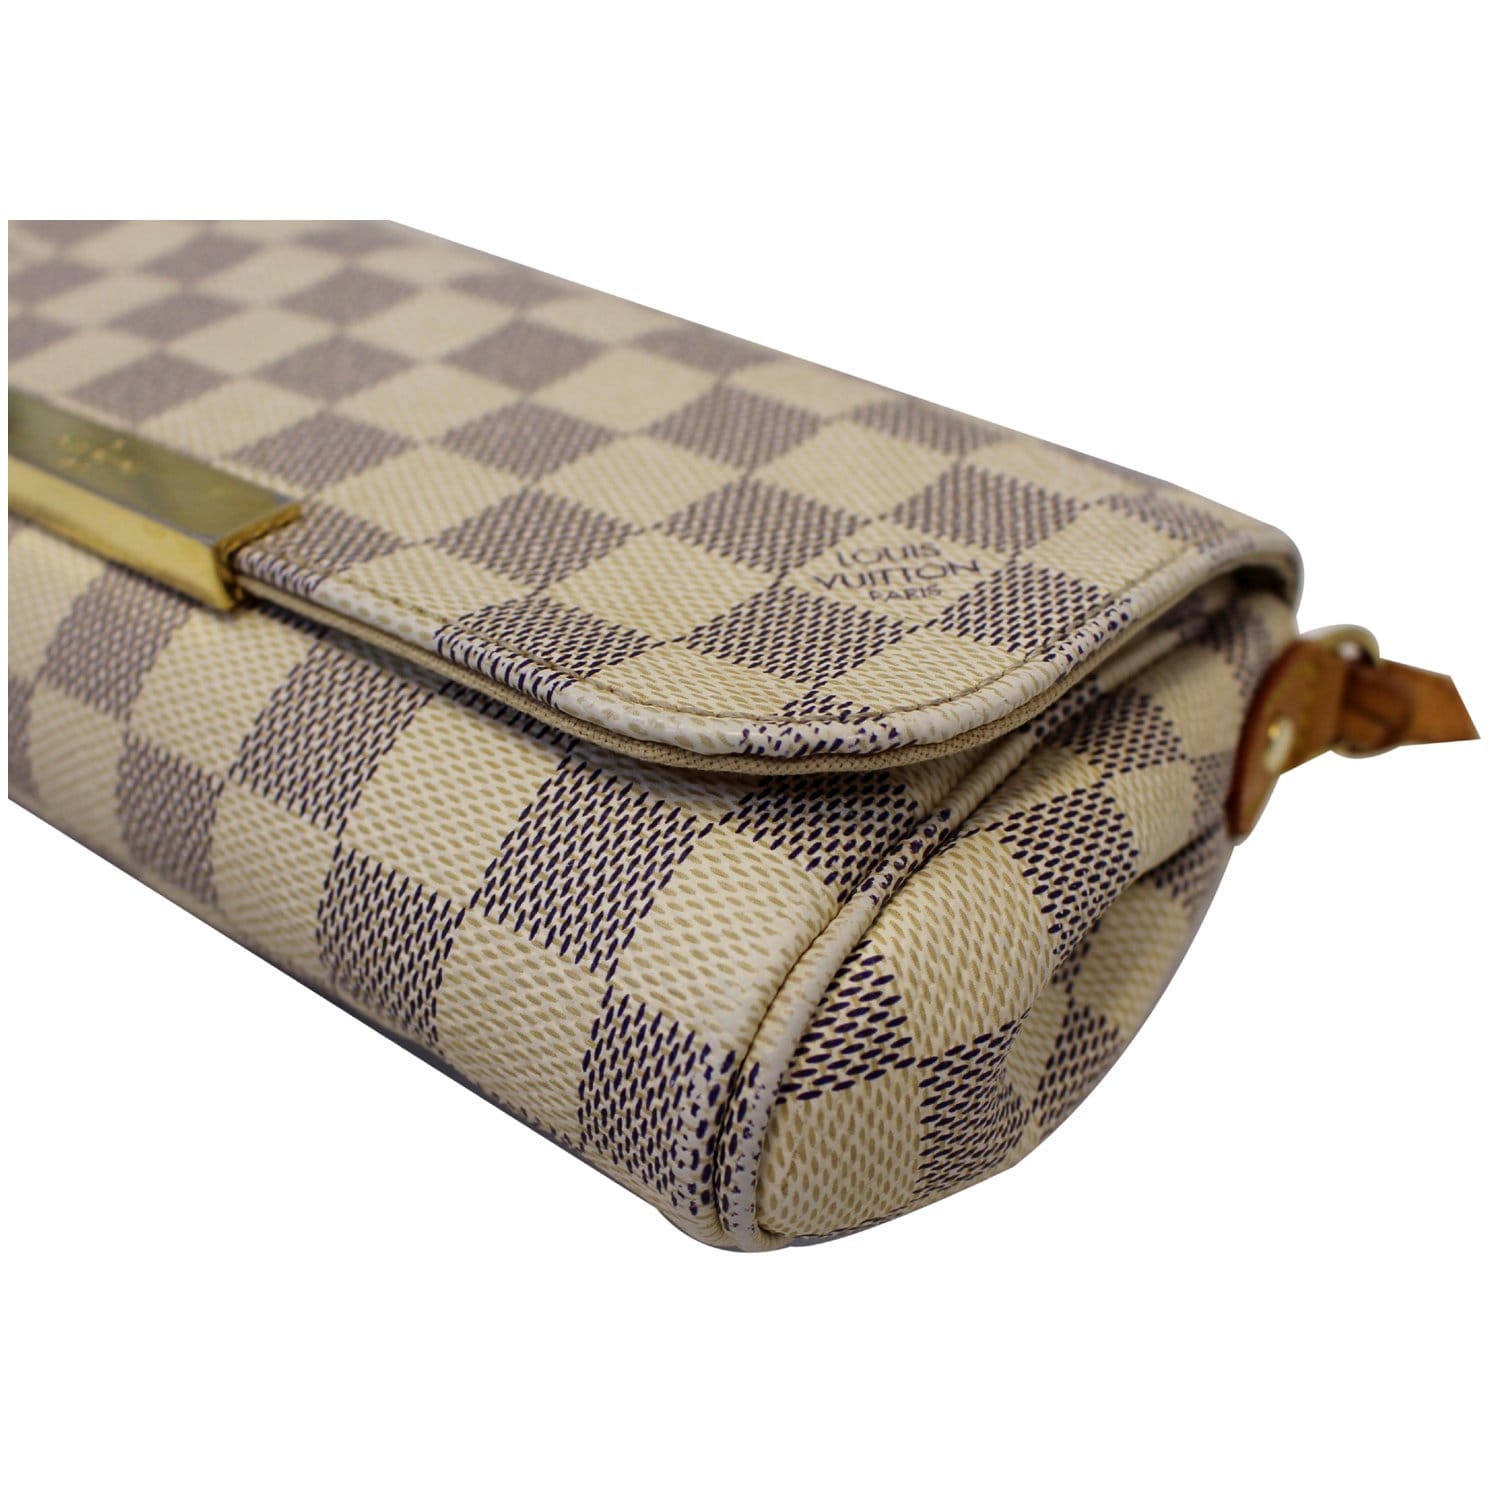 Louis Vuitton Damier Azur Canvas Favorite PM N41277, Accessorising - Brand  Name / Designer Handbags For Carry & Wear Share If You Care!